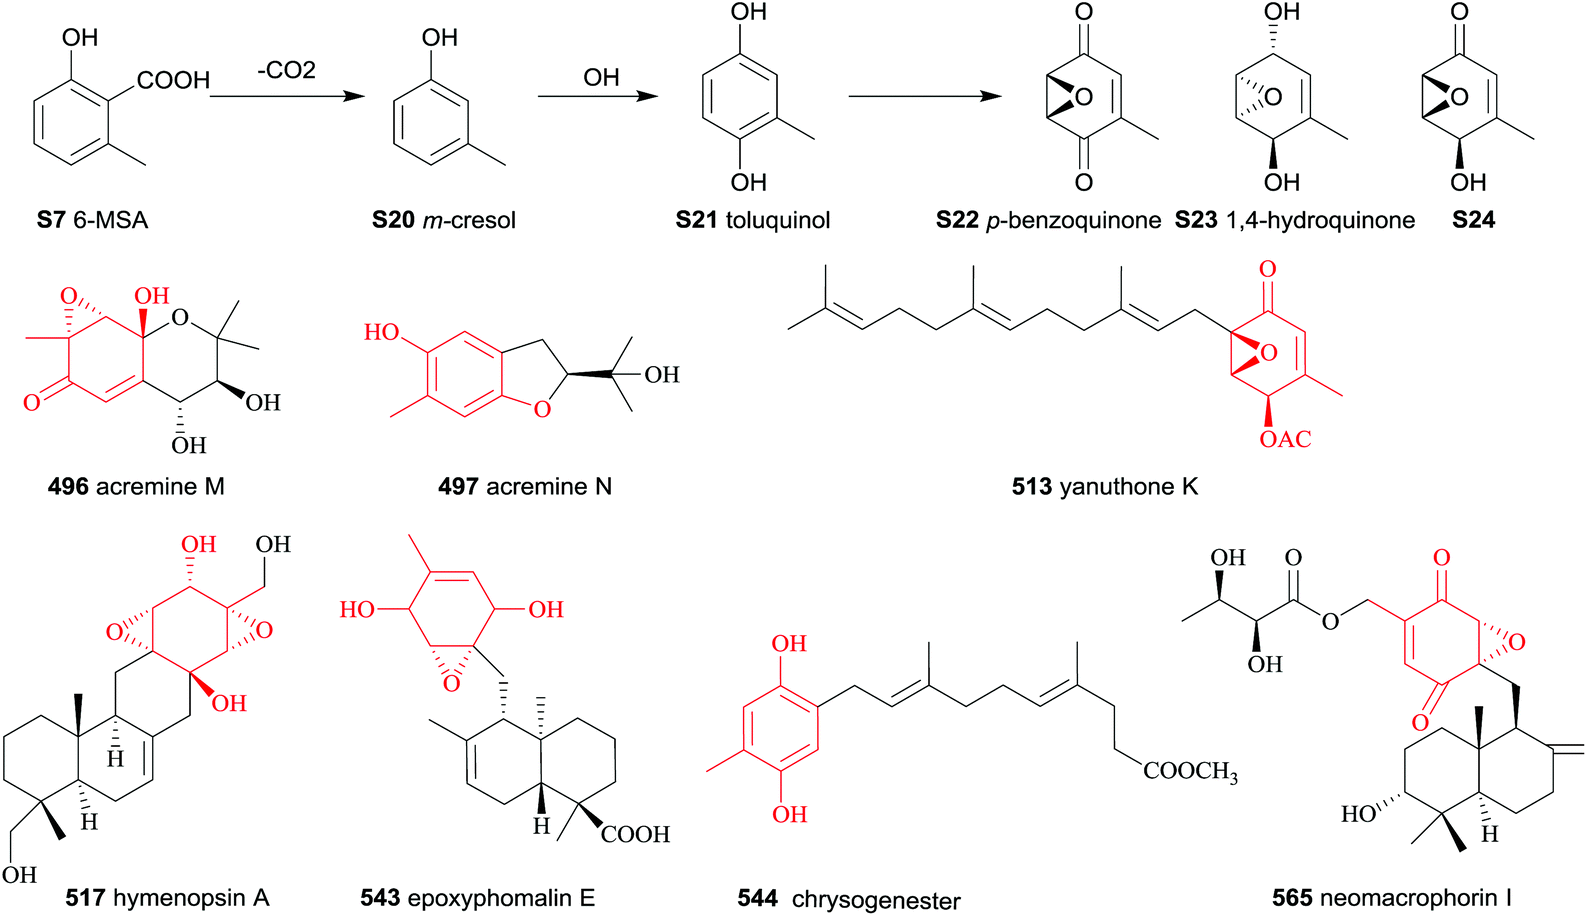 The chemistry and biology of fungal meroterpenoids (2009–2019) - Organic &  Biomolecular Chemistry (RSC Publishing) DOI:10.1039/D0OB02162H